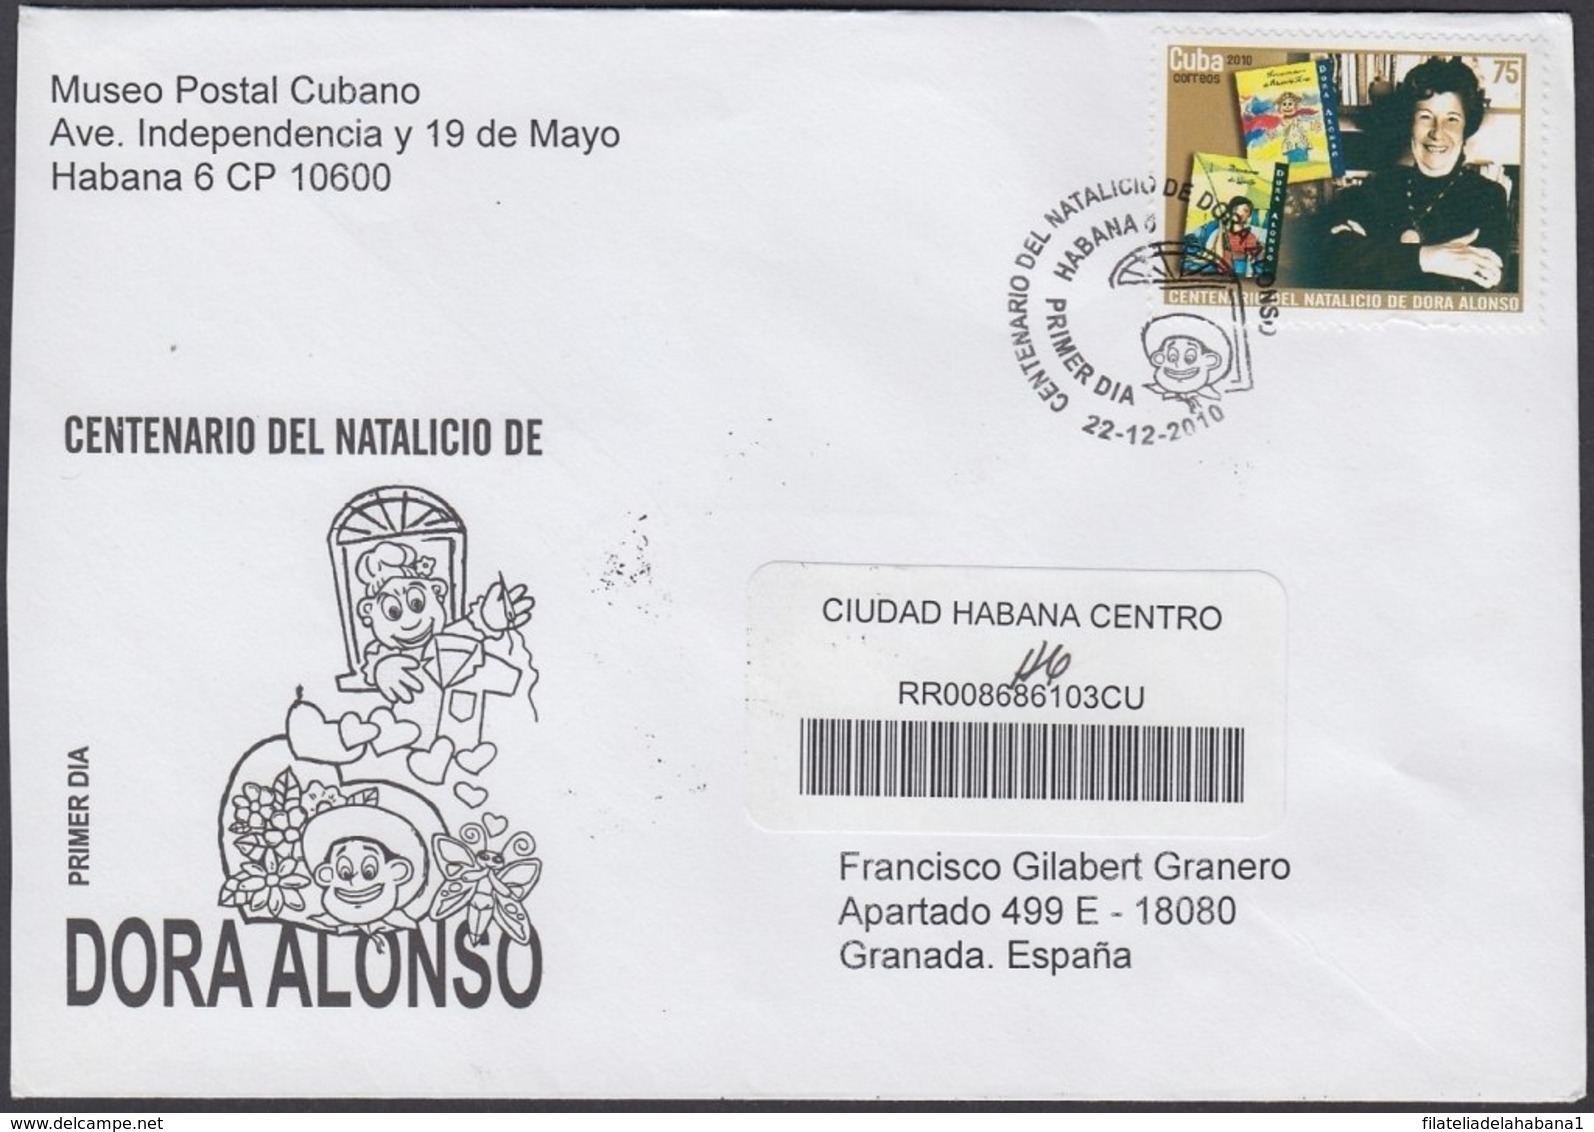 2010-FDC-97 CUBA FDC 2010. REGISTERED COVER TO SPAIN. DORA ALONSO, CHILDREN BOOK. - FDC